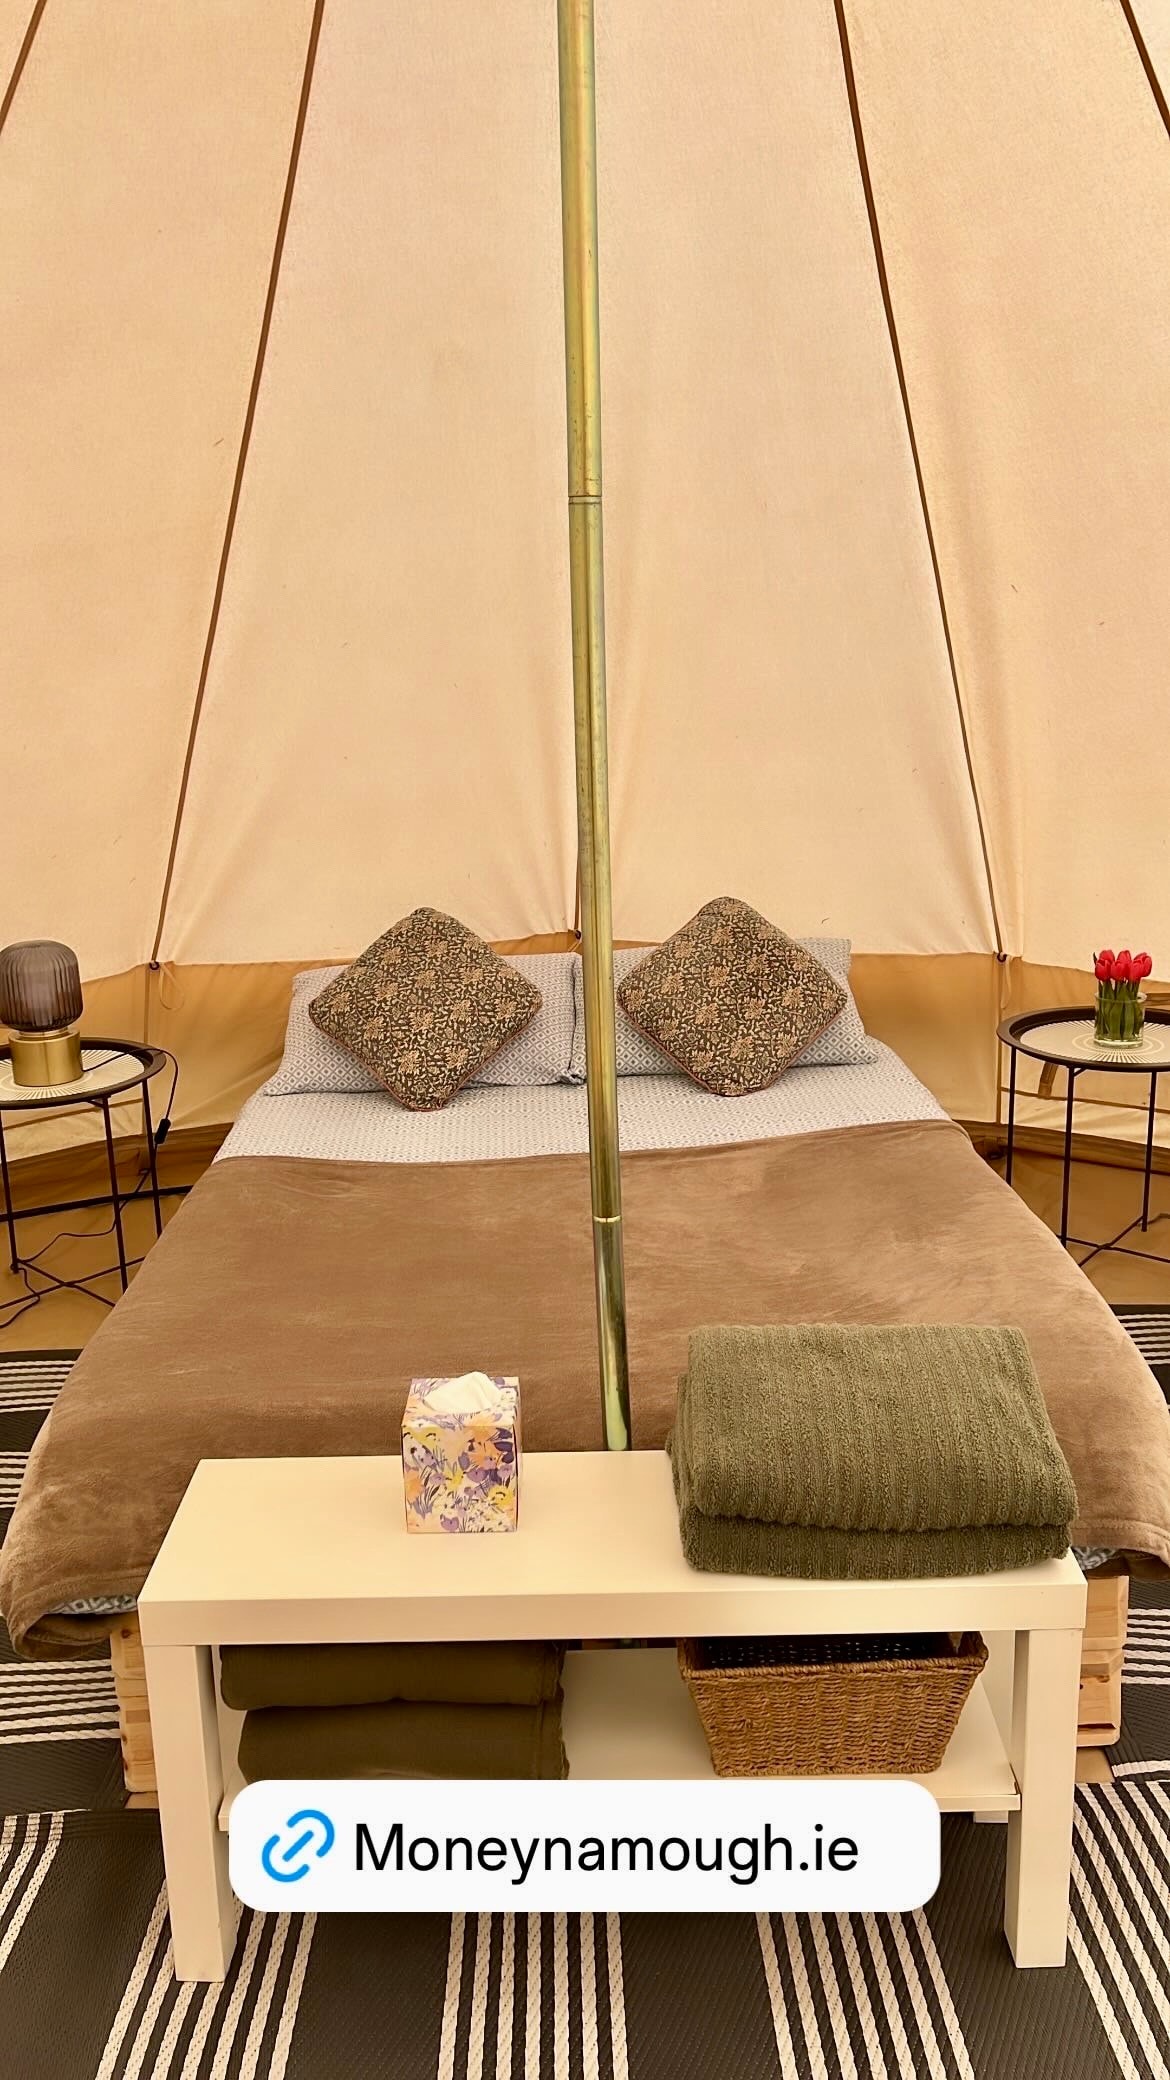 Bell Tent Glamping & SPA with Breakfast Hamper